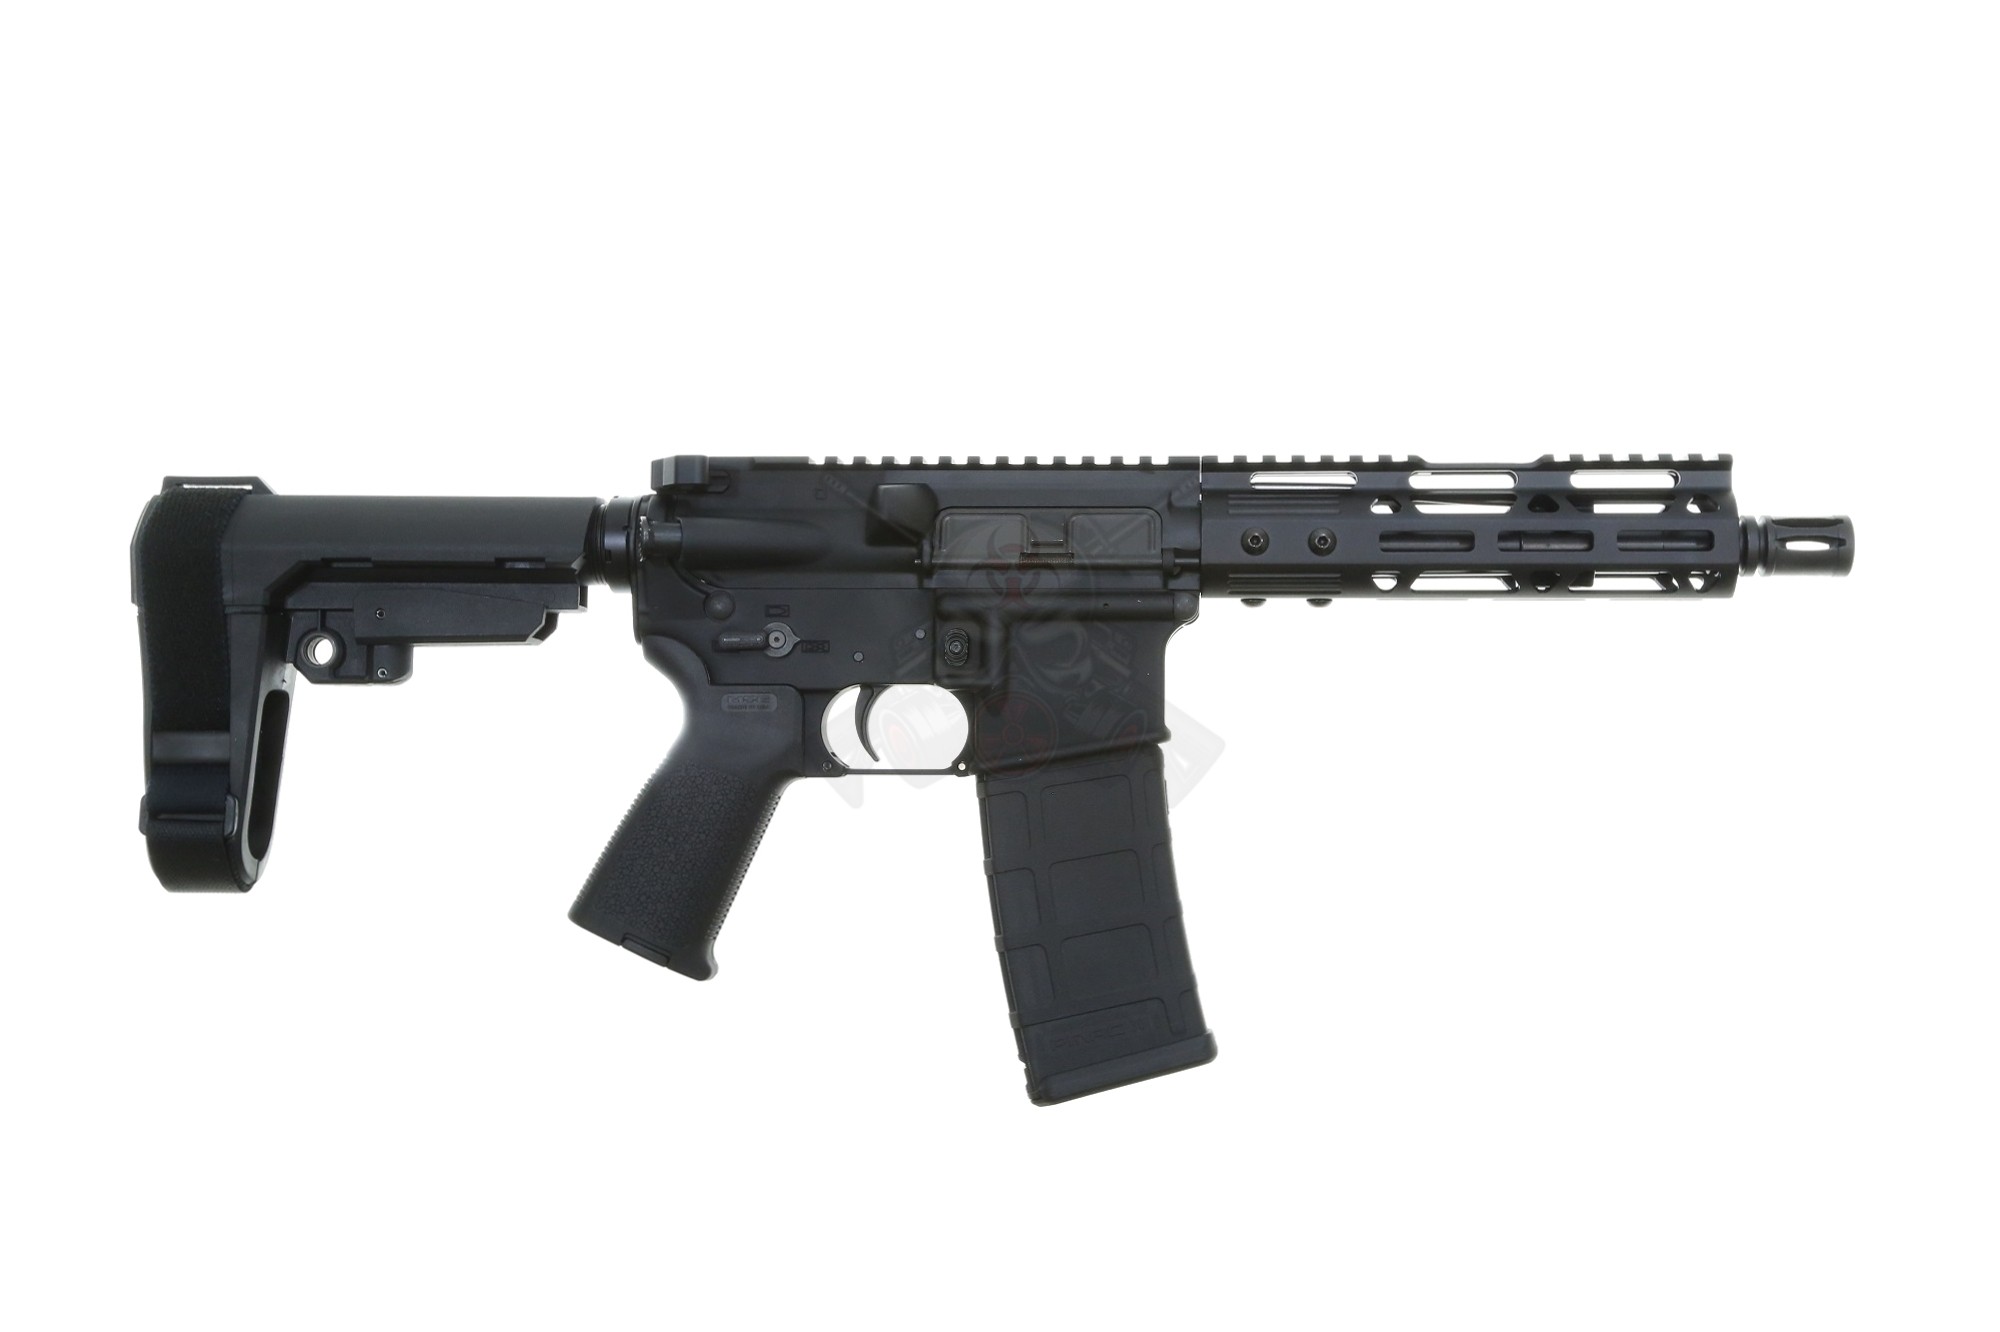 One of the preferred rifles of the Sinaloa Cartel, according to the testimonies of the "Great" It was the AR-15.